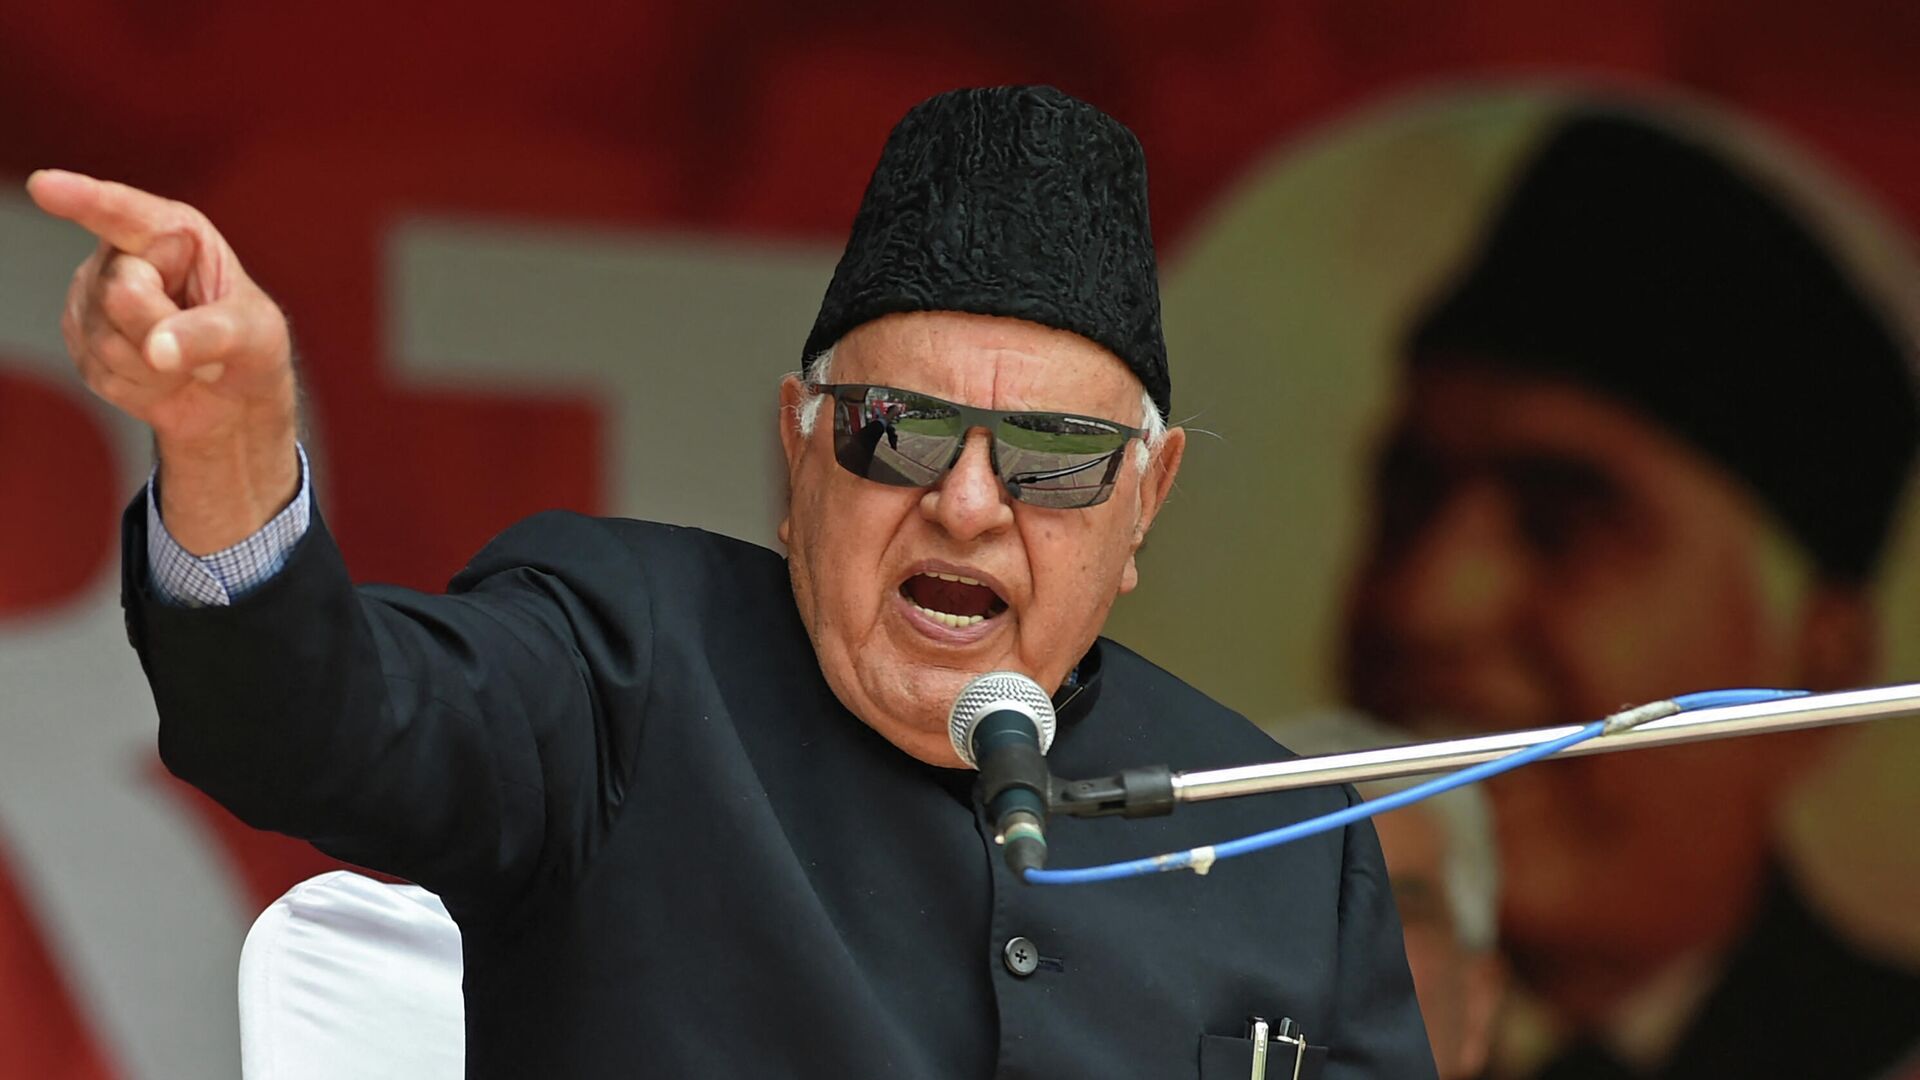 National Conference president and former Jammu and Kashmir chief minister Farooq Abdullah speaks during an election campaign in Srinagar on April 15, 2019 - Sputnik International, 1920, 08.09.2021